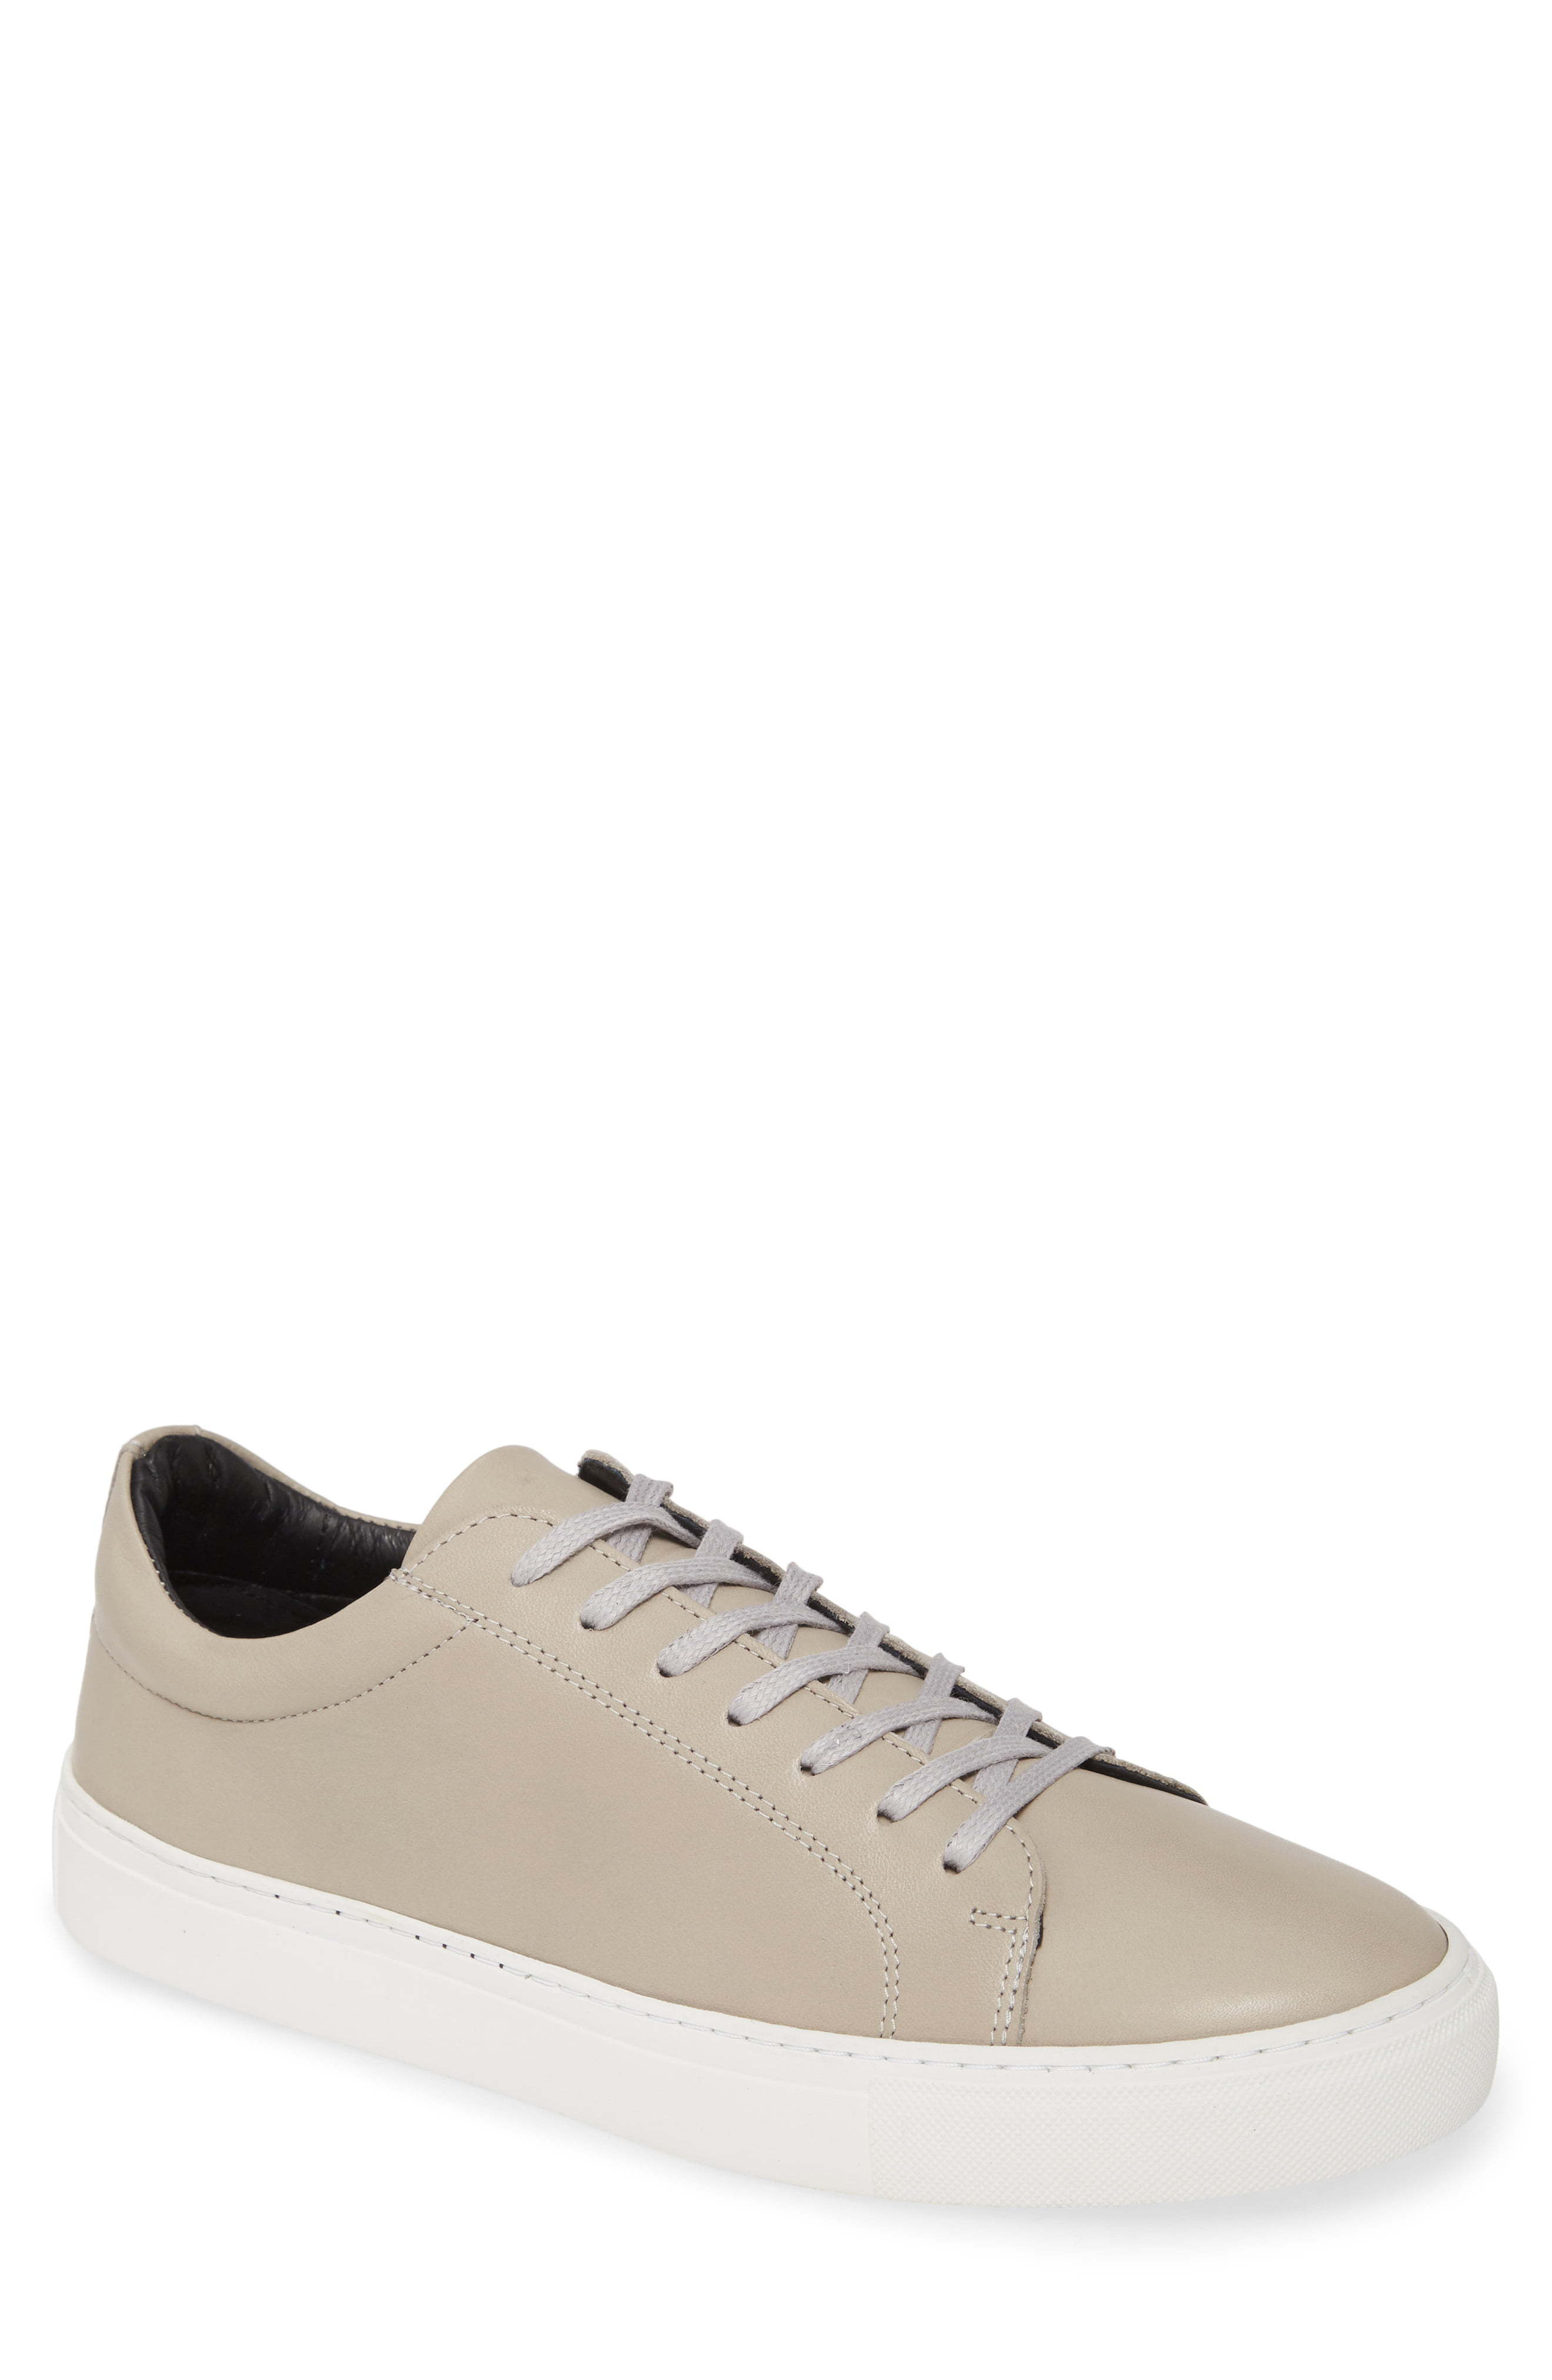 SUPPLY LAB Damian Lace Up Sneaker, $60 | Nordstrom | Lookastic